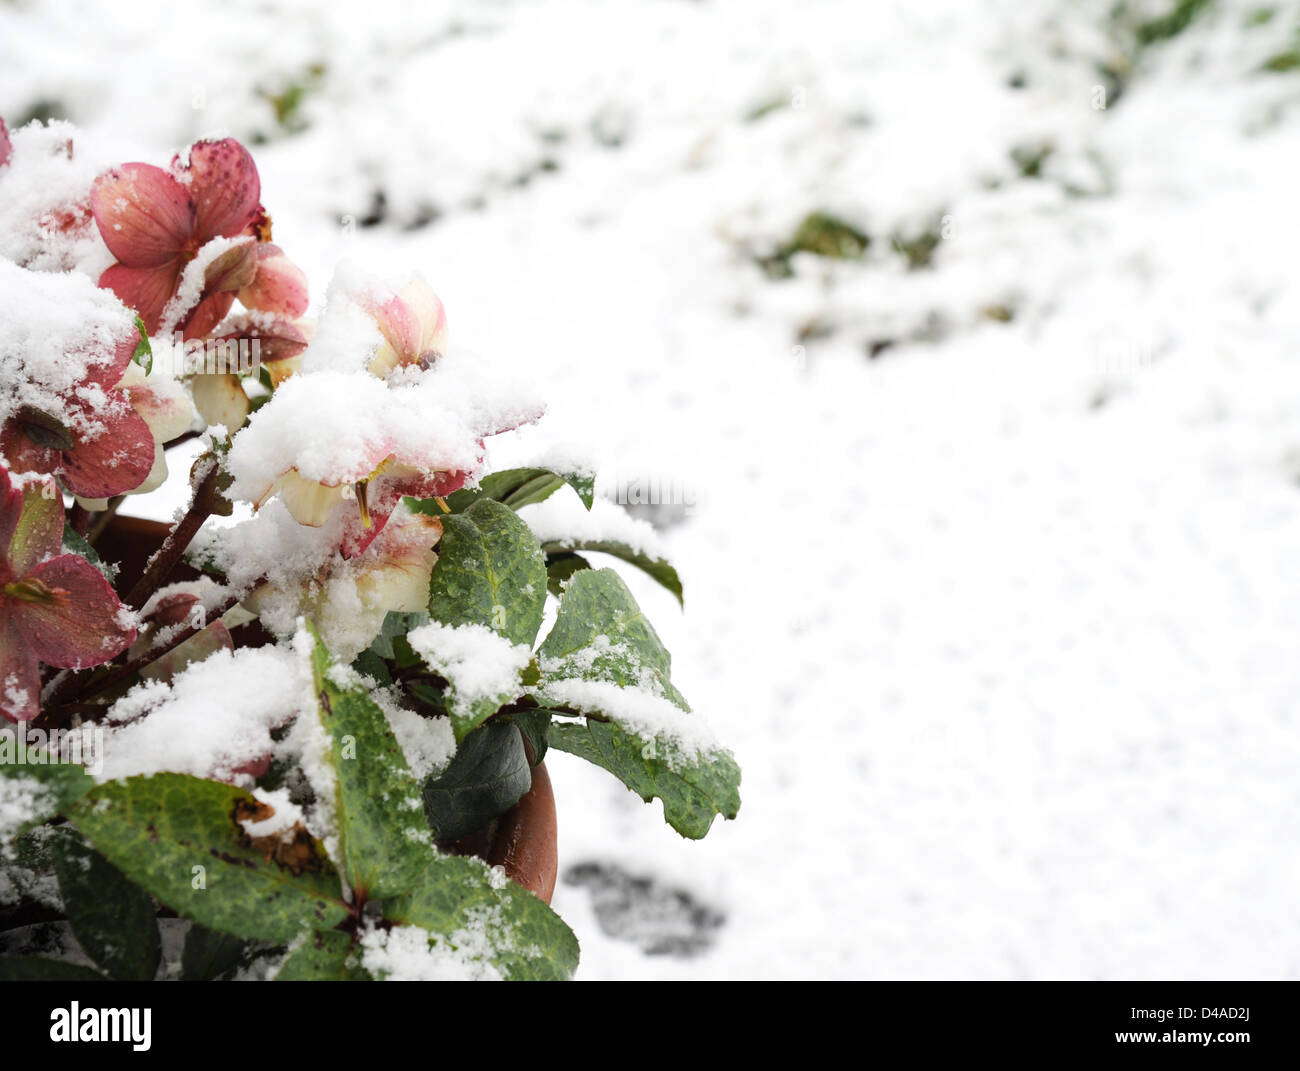 Hellebore plant laden with snow. Stock Photo